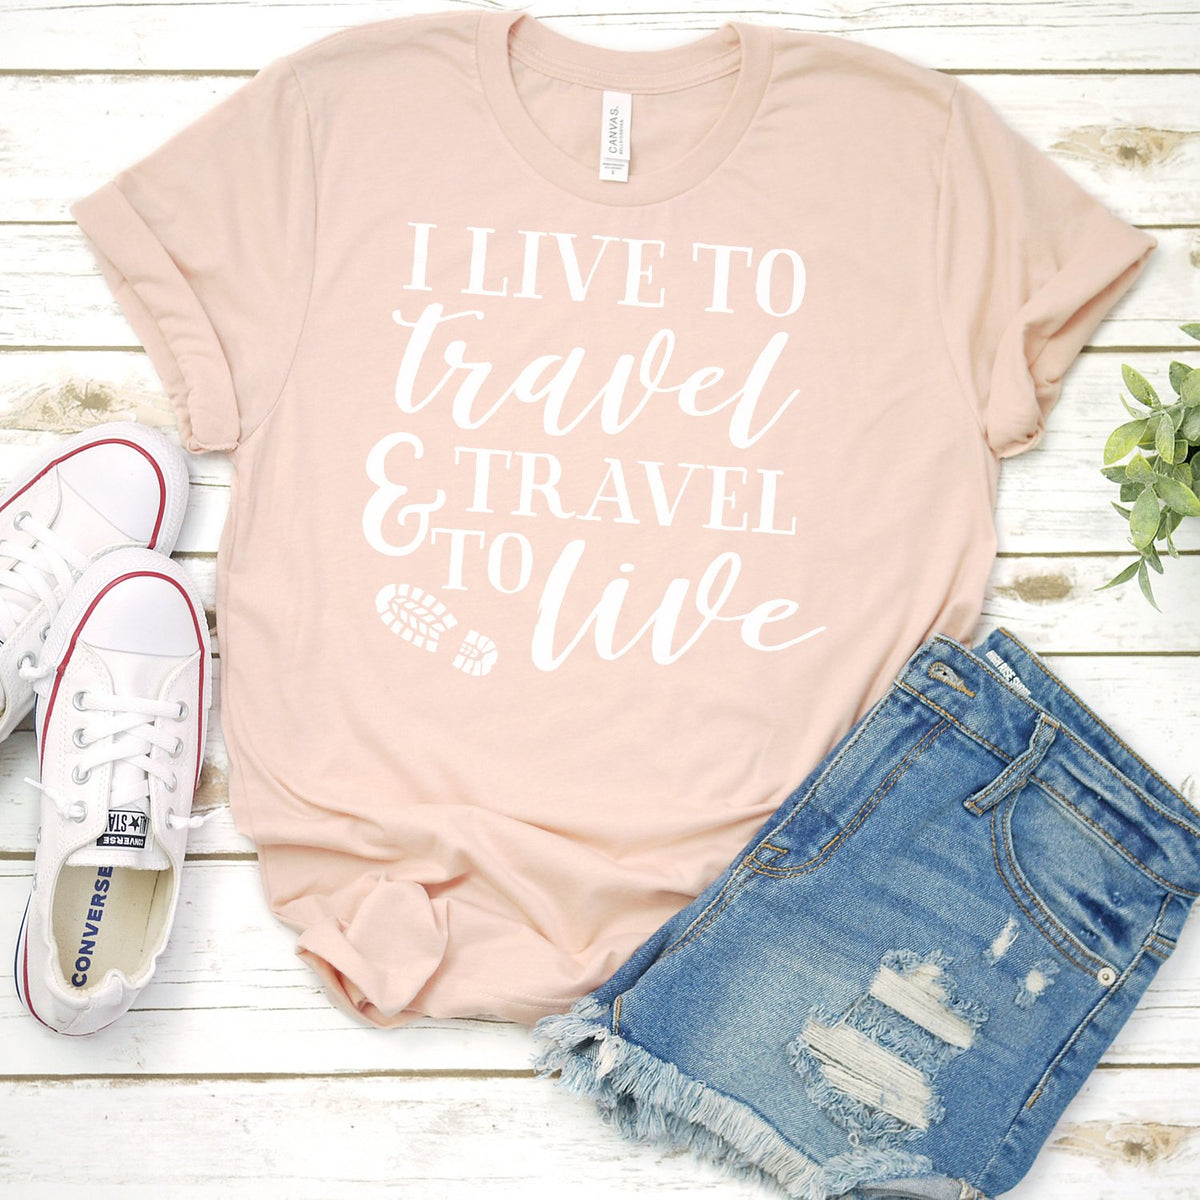 I Live to Travel &amp; Travel to Live - Short Sleeve Tee Shirt